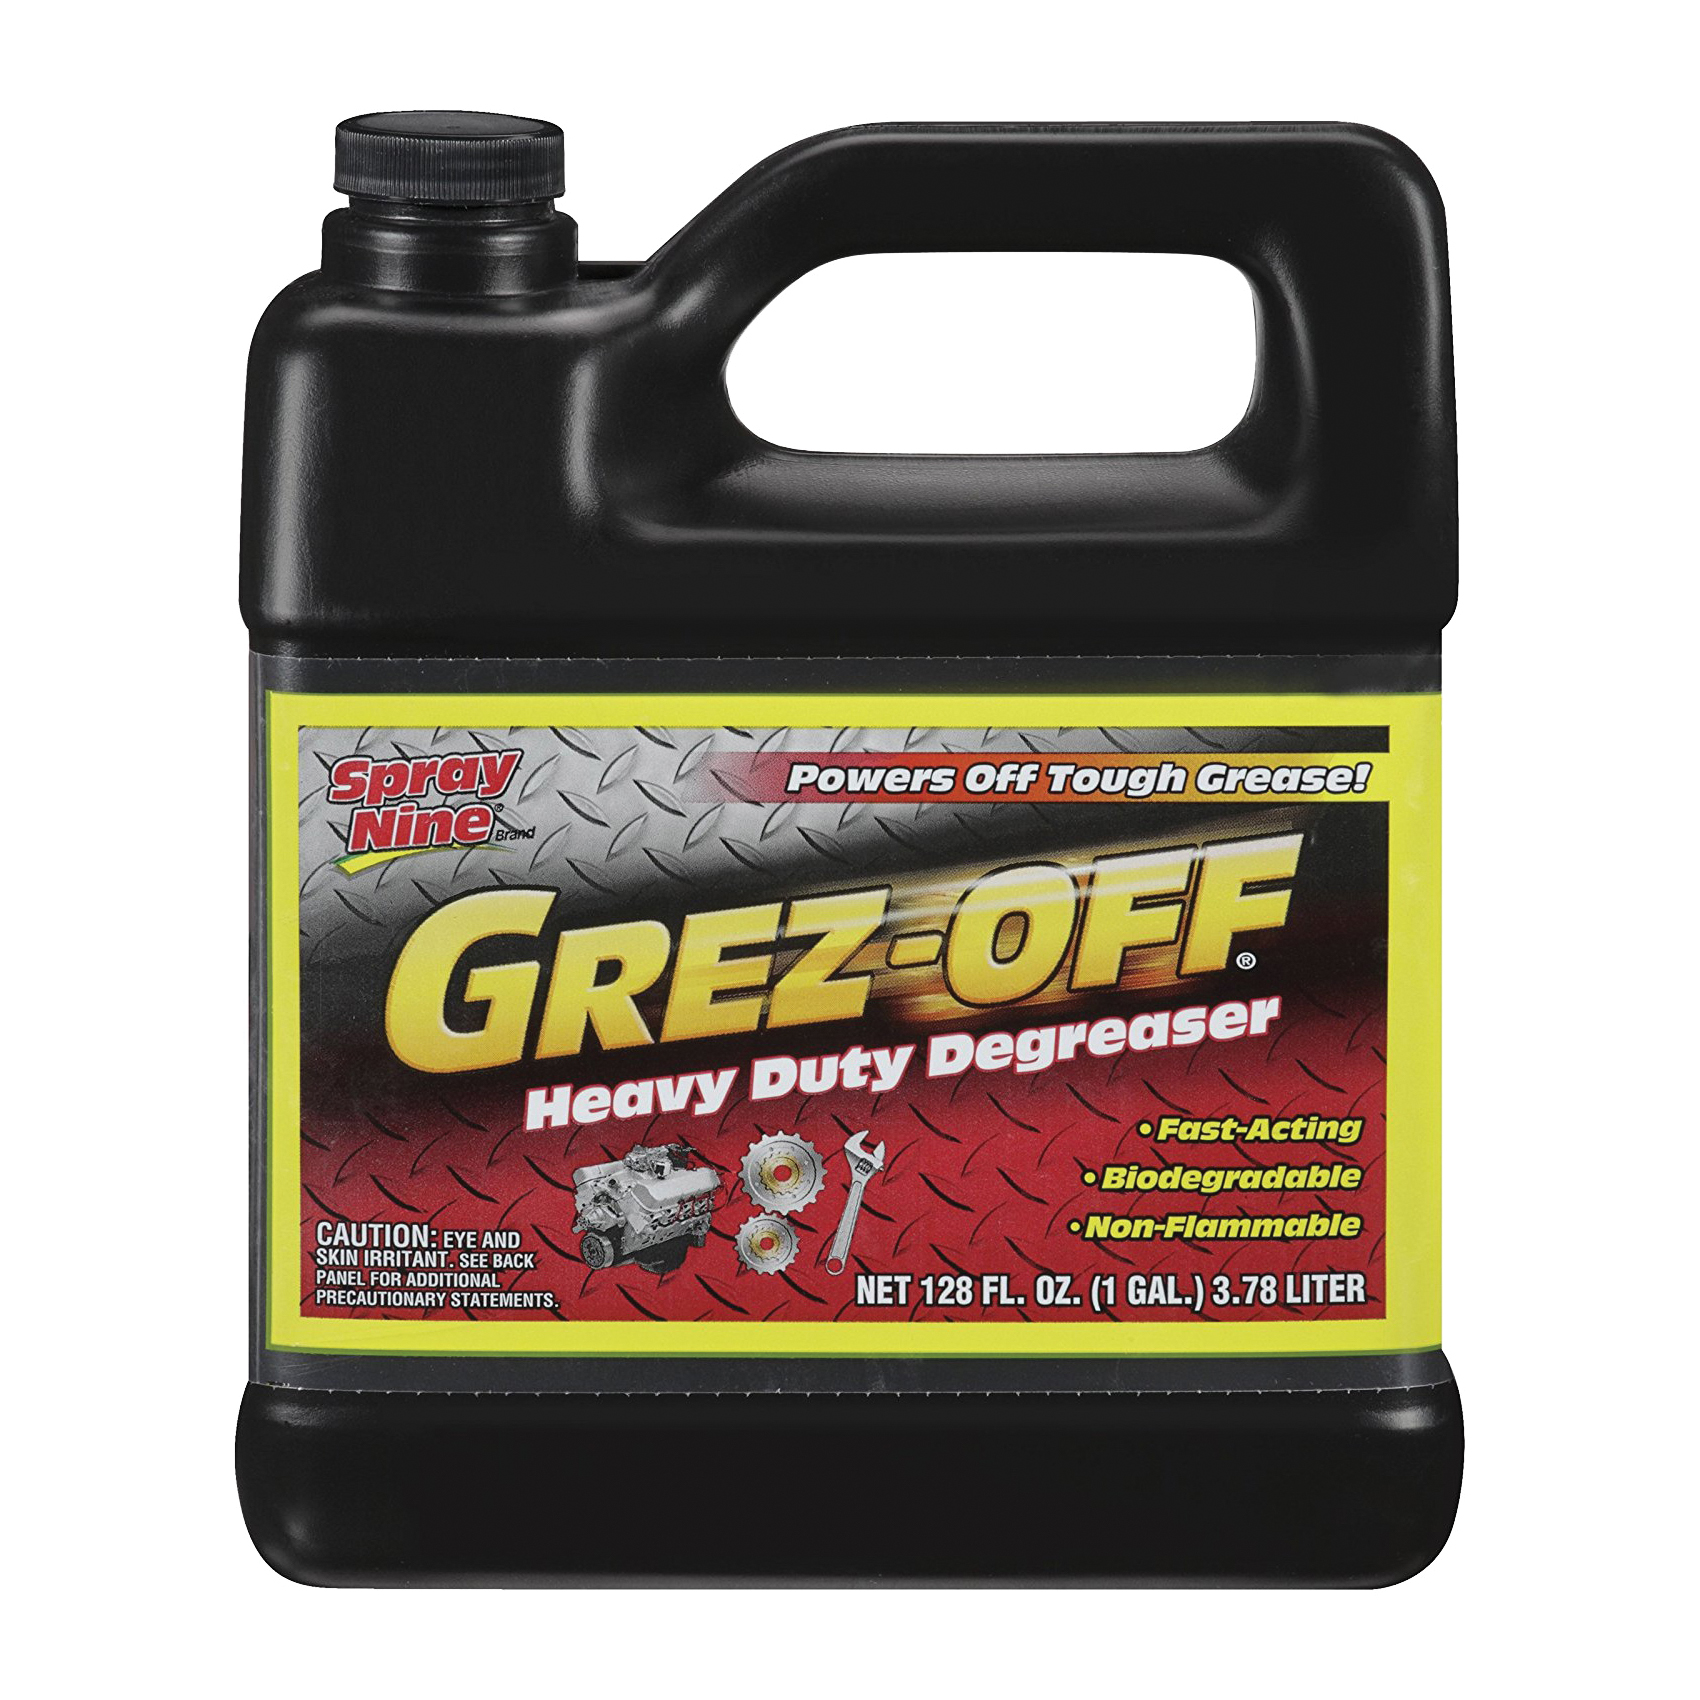 Goo Gone 2045 Grill and Grate Cleaner, Liquid, Clear, 24